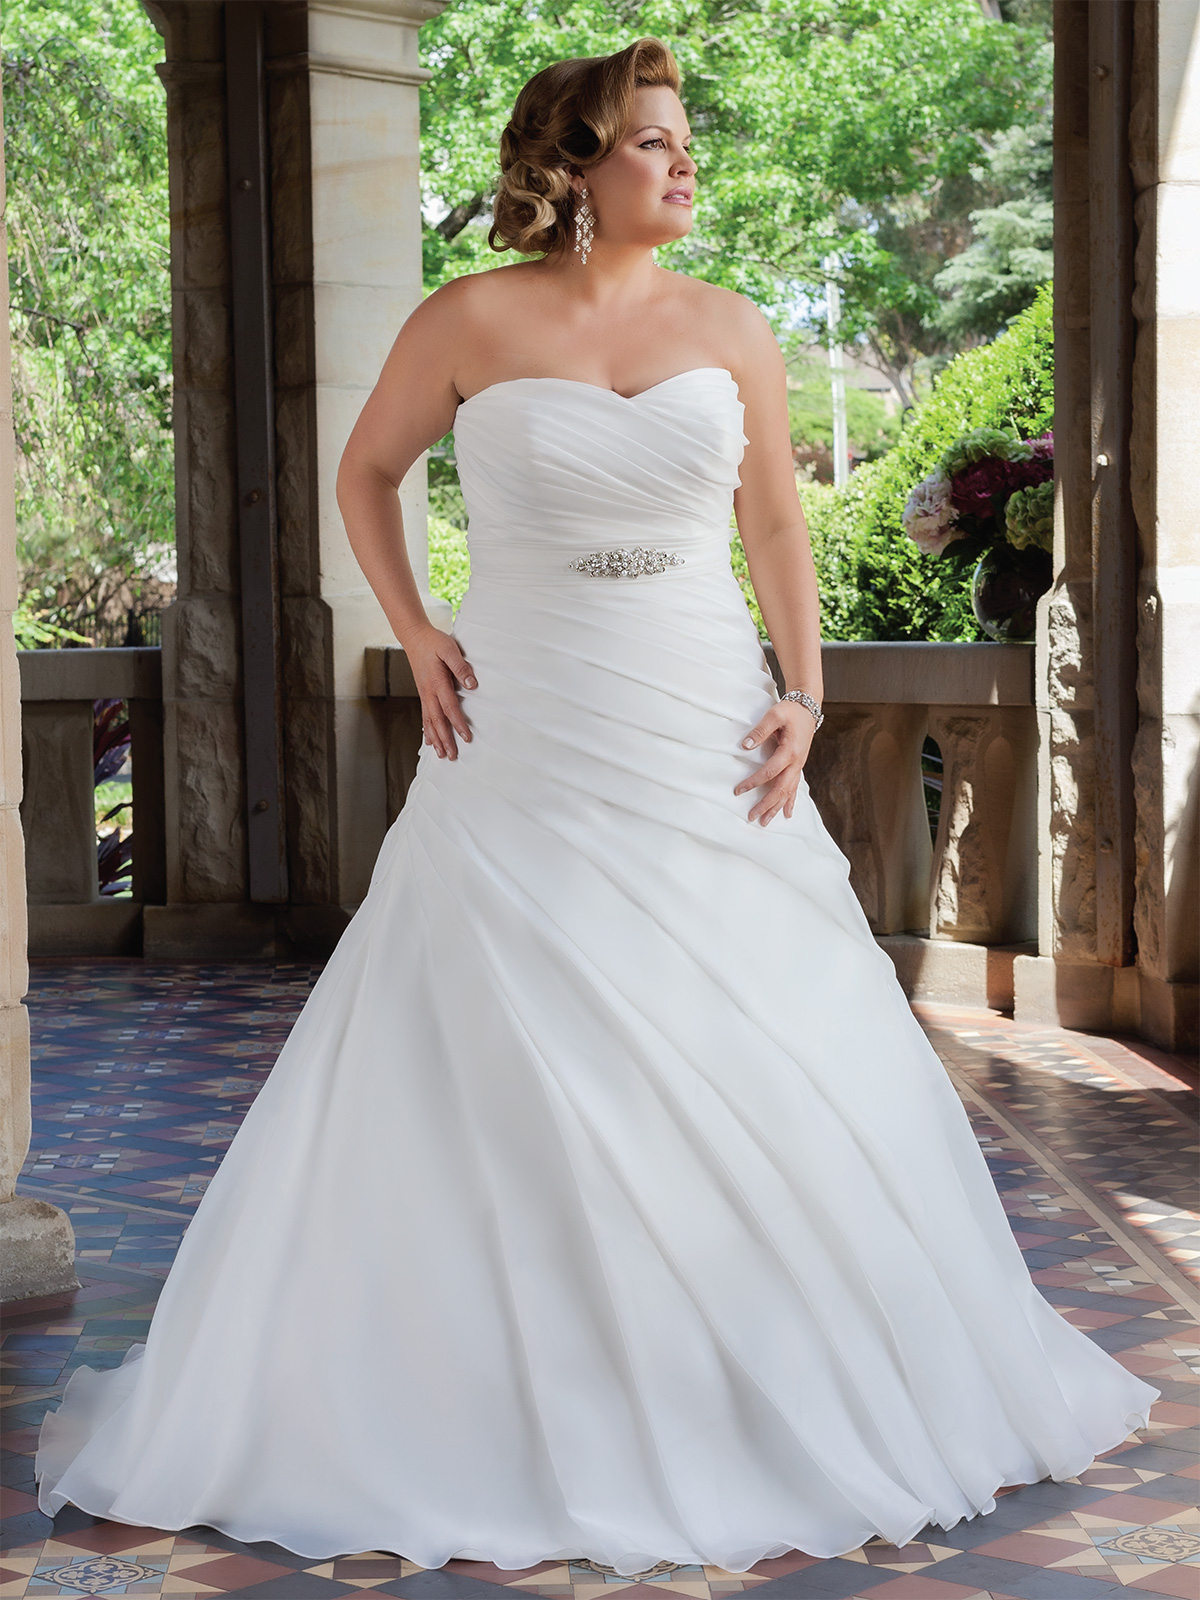 Elegant Wedding Dresses For Plus Size Top 10 Find The Perfect Venue For Your Special Wedding Day